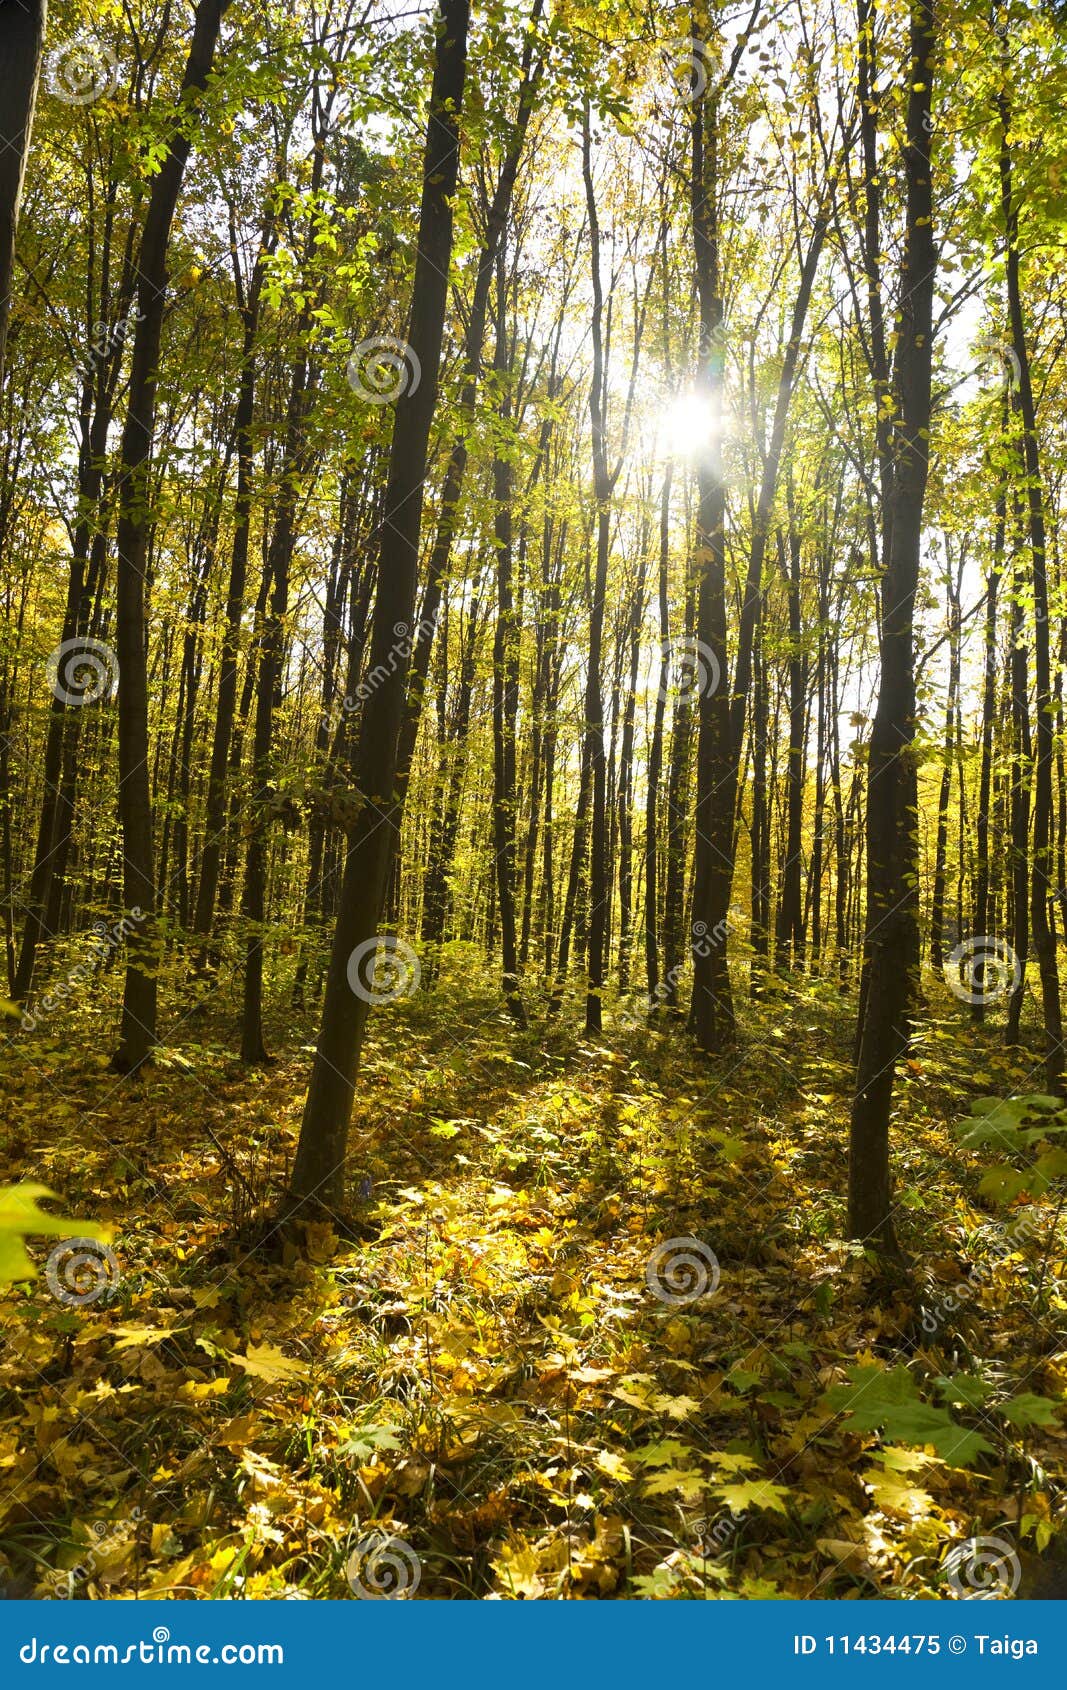 Autumn Forest Bright Colors Of Leaves Sunlight Royalty Free Stock